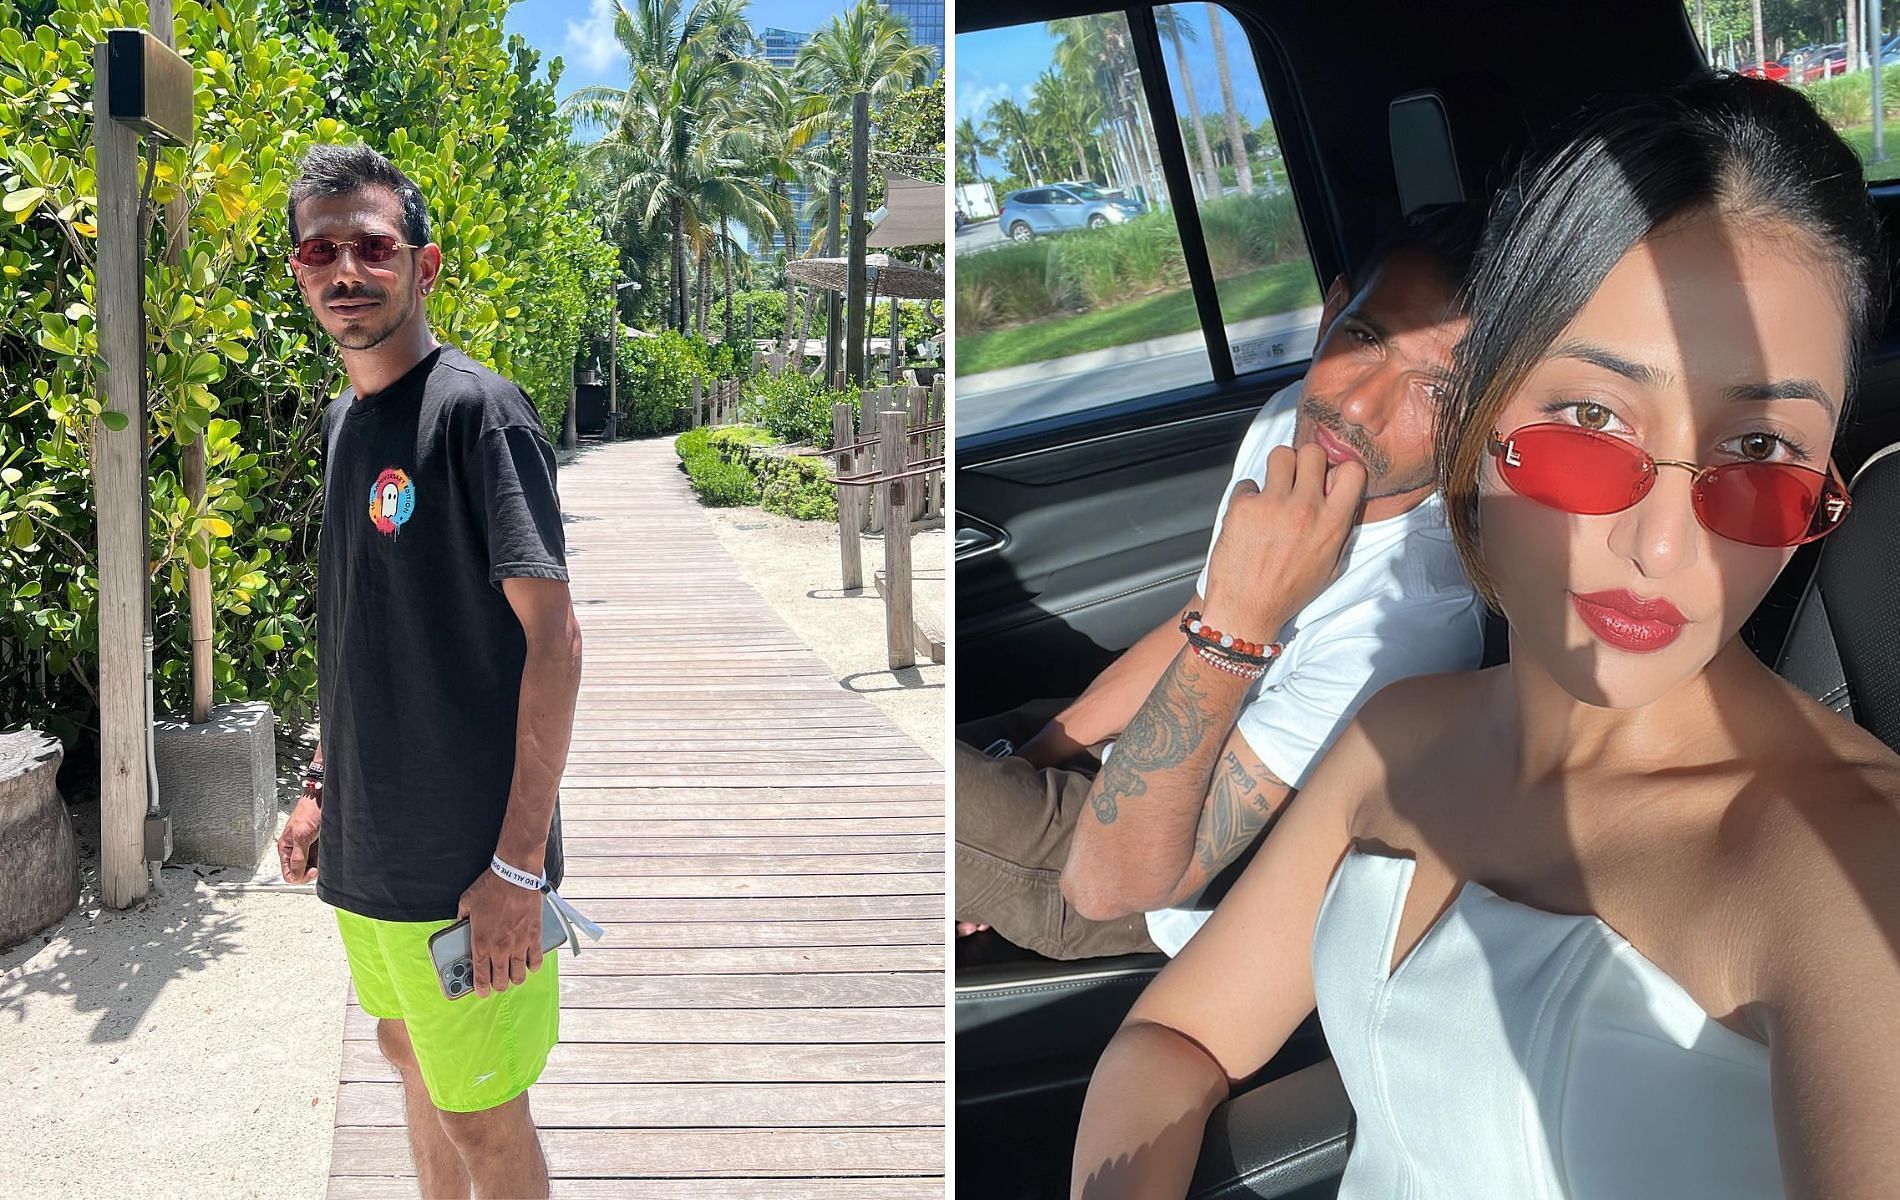 Yuzvendra Chahal (L) is vacationing in Miami. (Pics: Instagram)